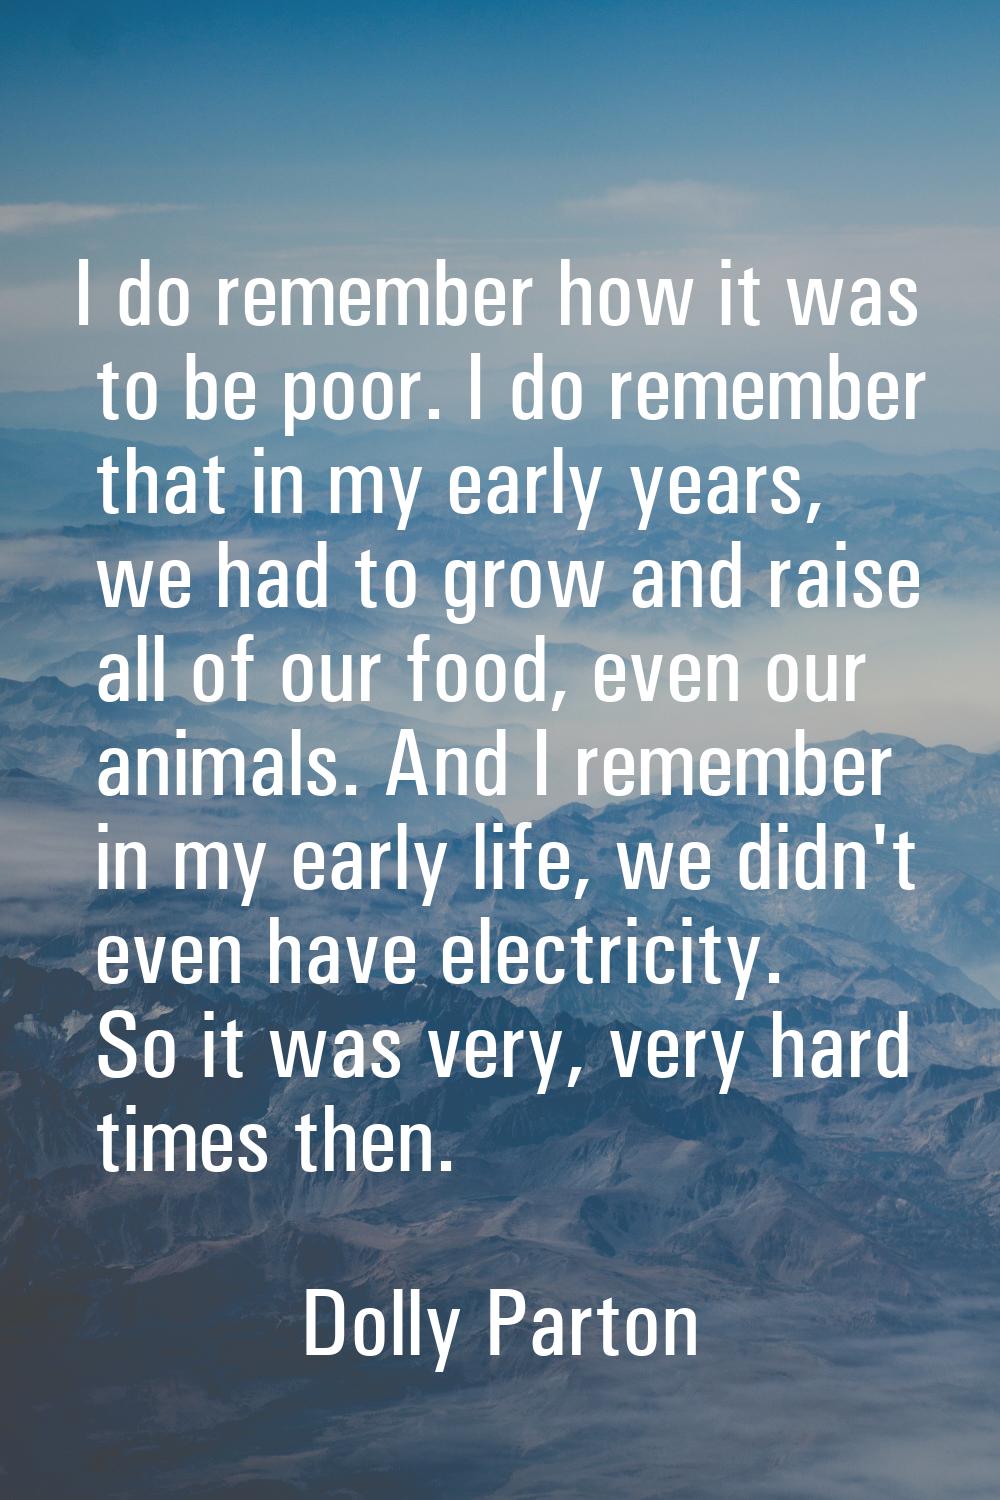 I do remember how it was to be poor. I do remember that in my early years, we had to grow and raise